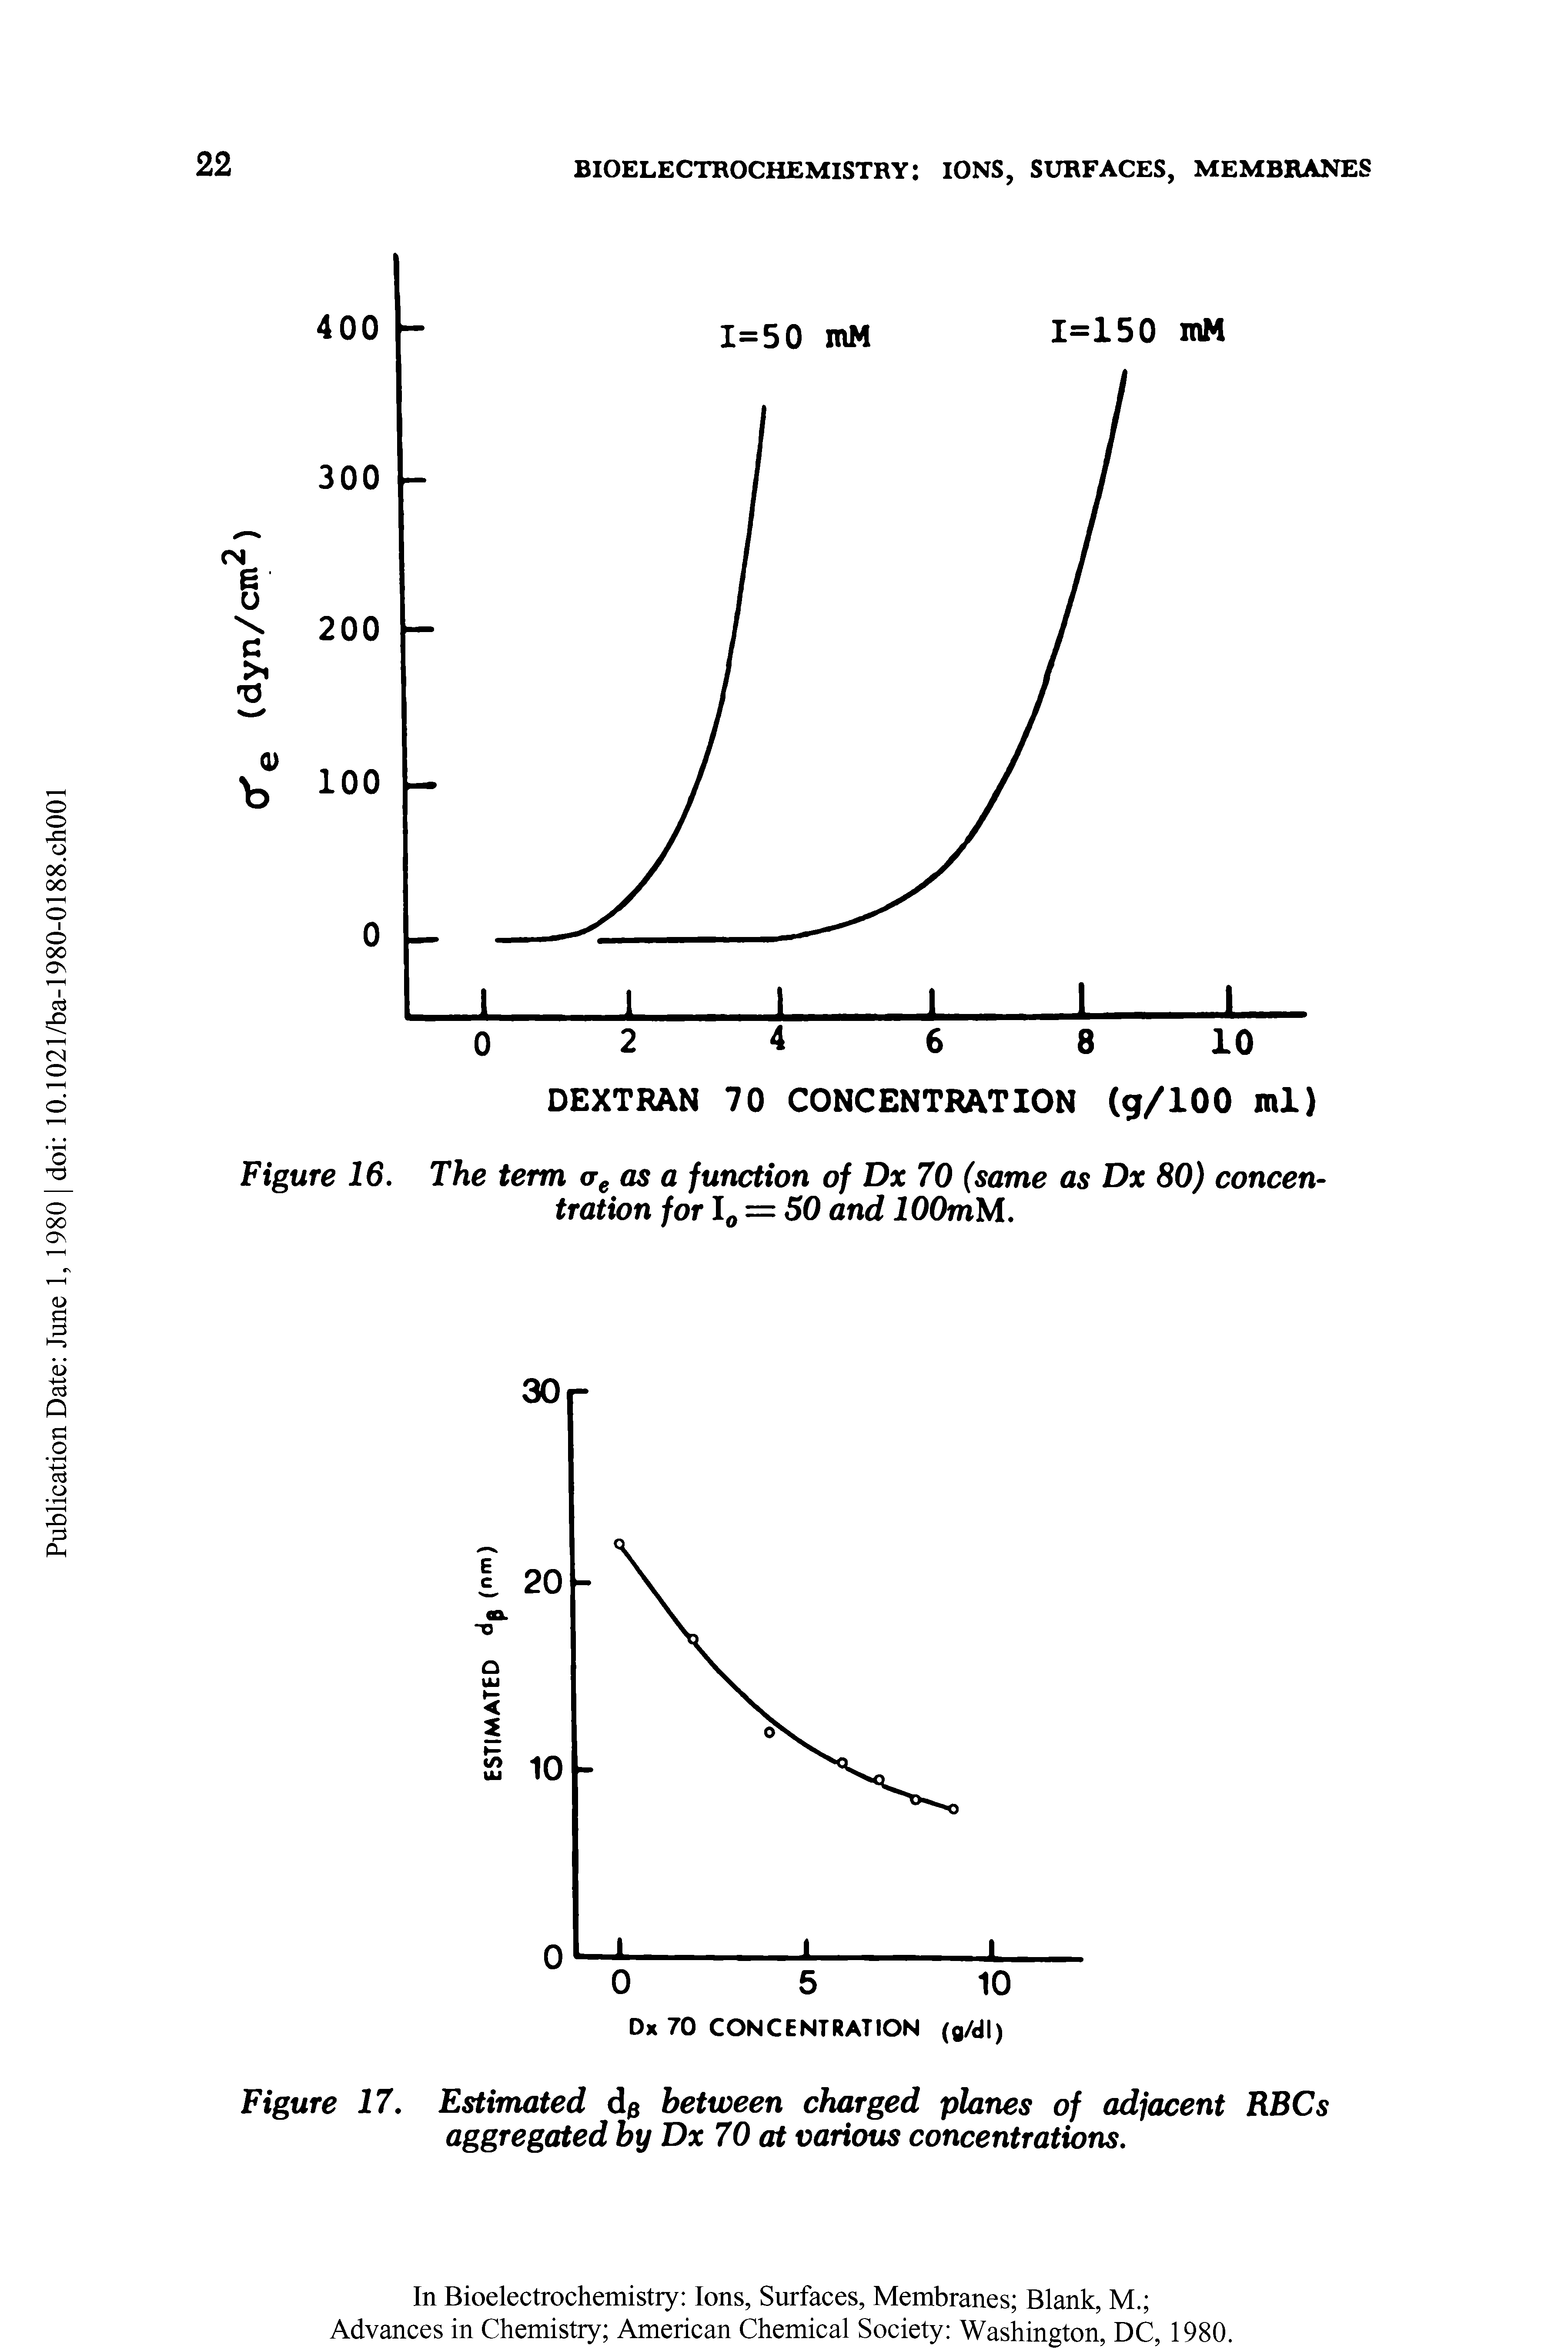 Figure 17. Estimated d0 between charged planes of adjacent RBCs aggregated by Dx 70 at various concentrations.